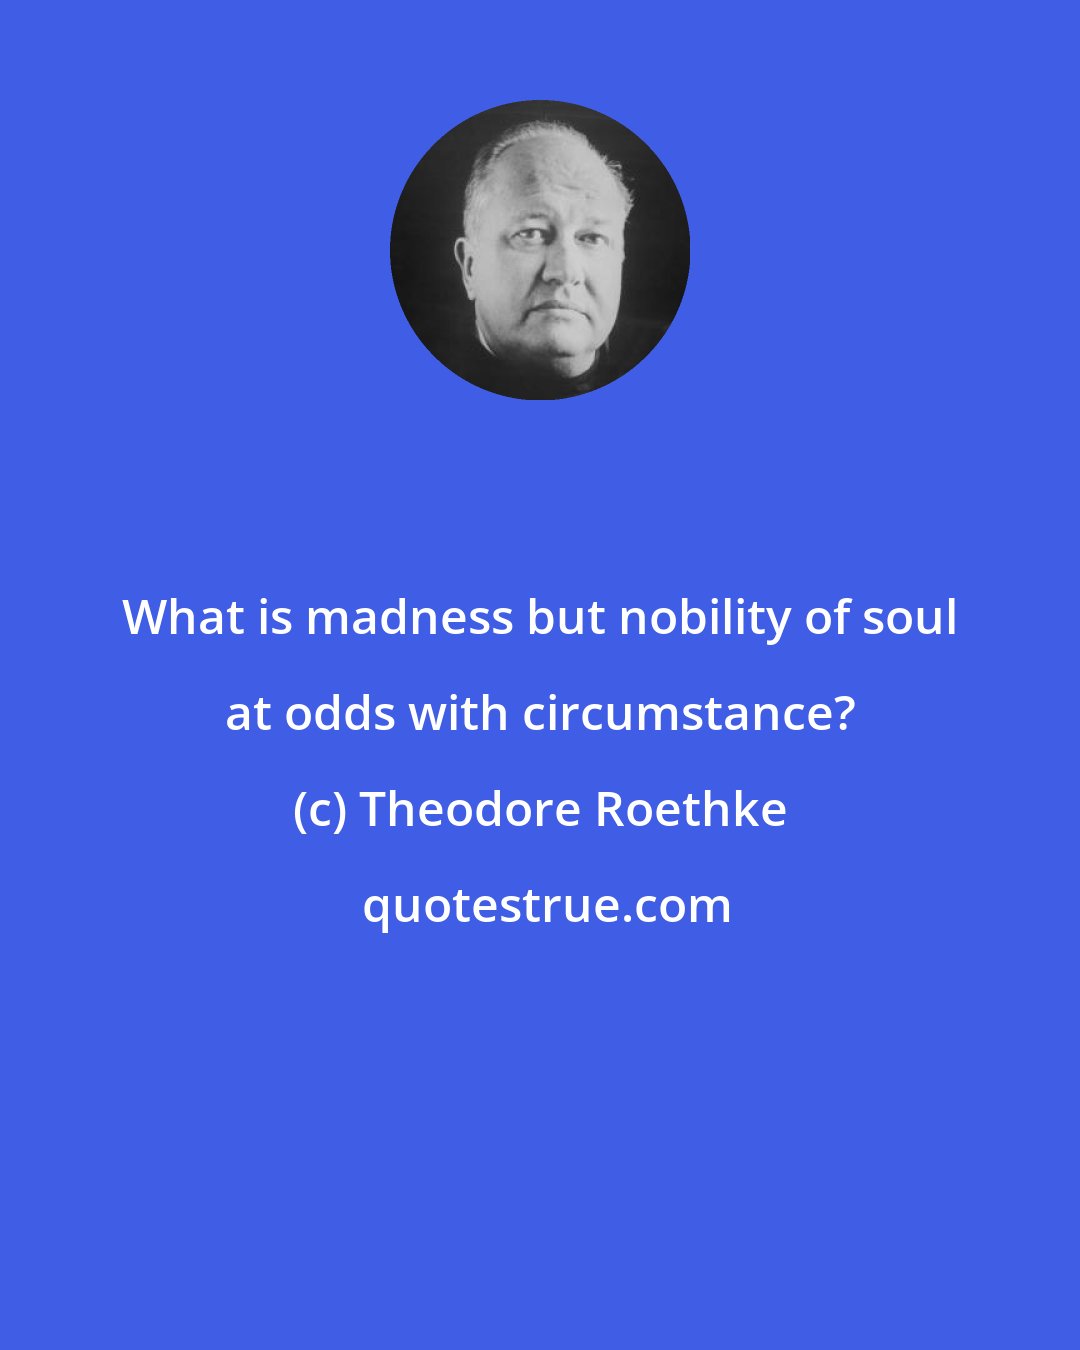 Theodore Roethke: What is madness but nobility of soul at odds with circumstance?